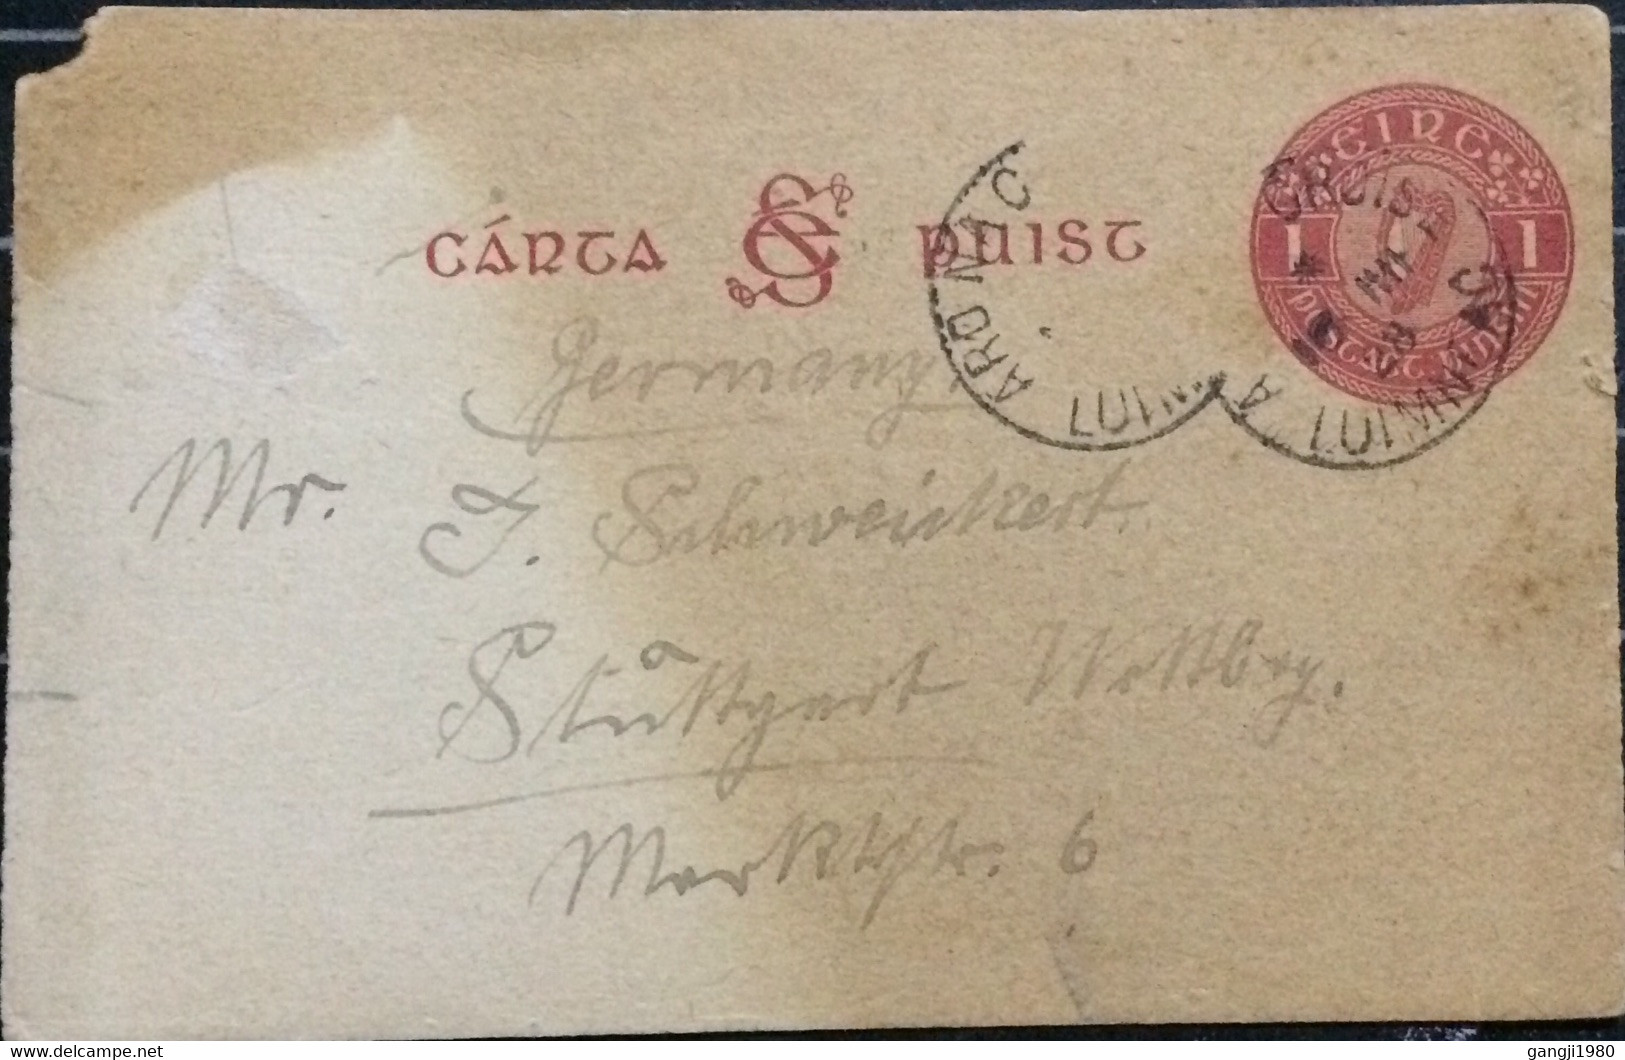 IRELAND 1928, STATIONERY CARD USED, MUSIC INSTRUMENT, ARO MACROSE LUIMNEACH CITY CANCEL - Covers & Documents